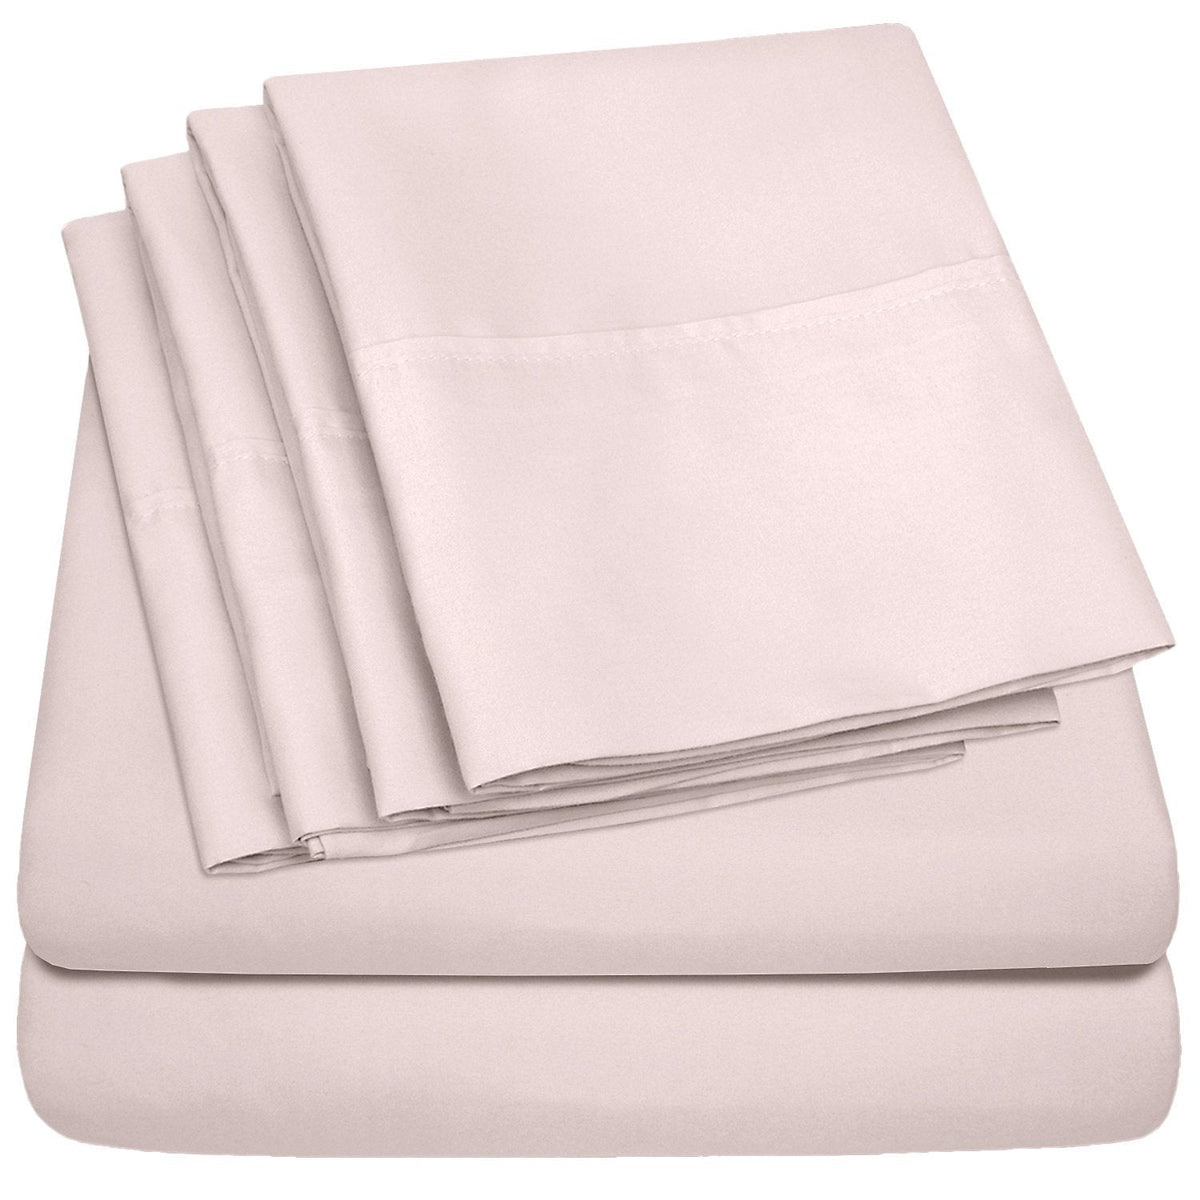 Deluxe 6-Piece Bed Sheet Set (Pale Pink) - Folded